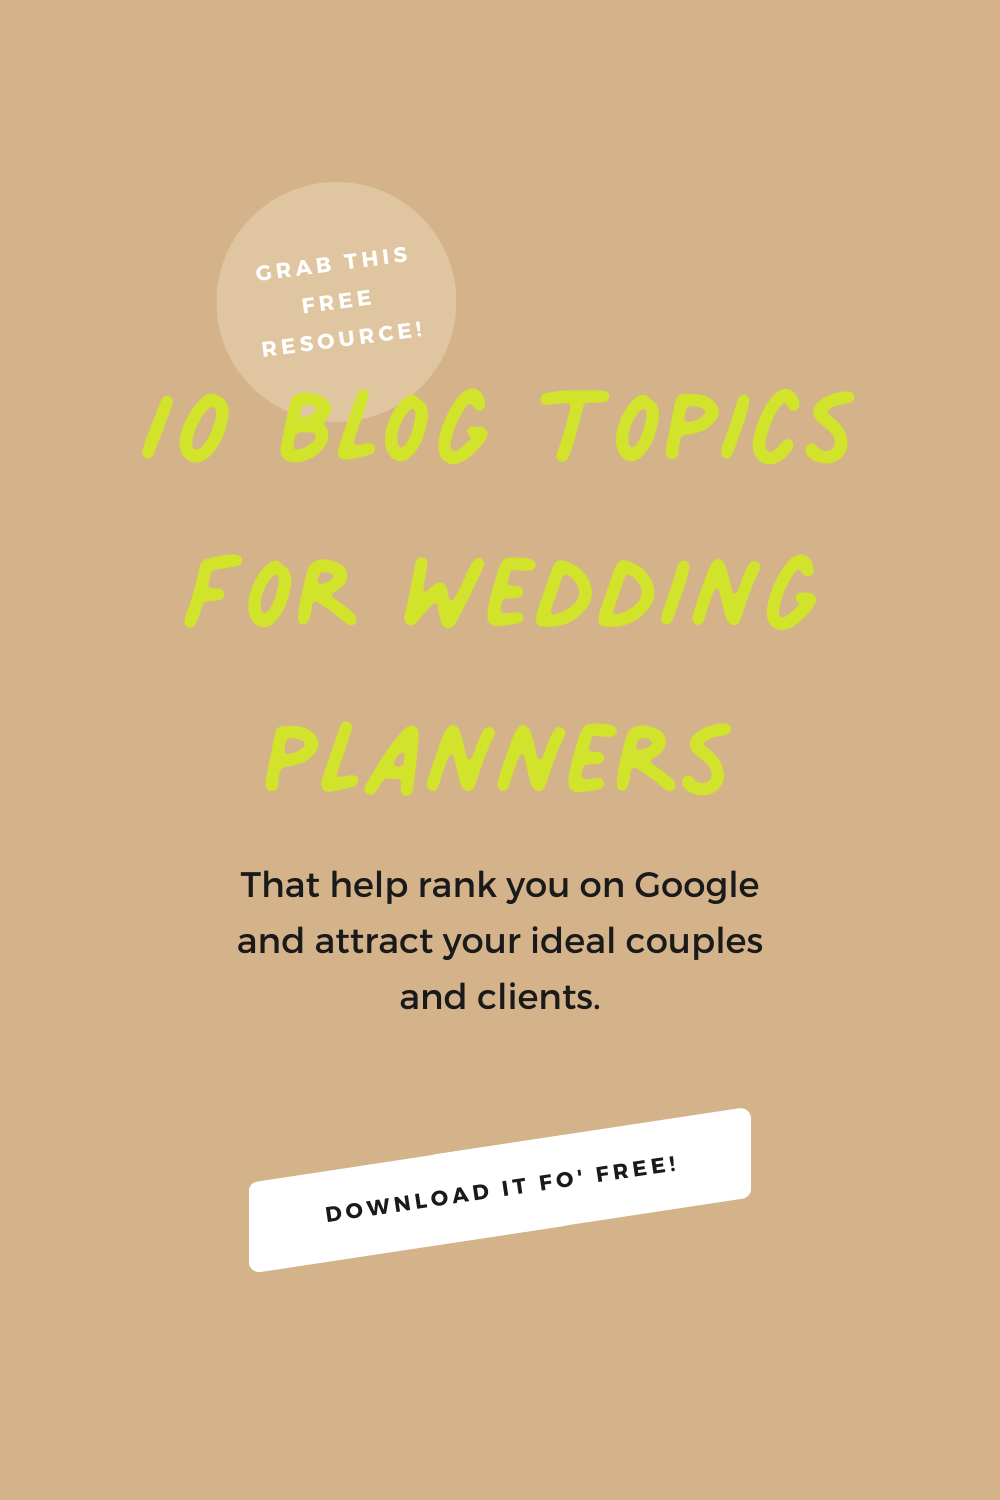 Elevate your wedding planning blog with our 10 free high-ranking blog topics. These ideas are keyword-focused to ensure your posts rank well on Google, drawing your ideal clientele to your site. Download your free guide to wedding planner blog topics today and take the first step towards creating irresistible content that stands out!